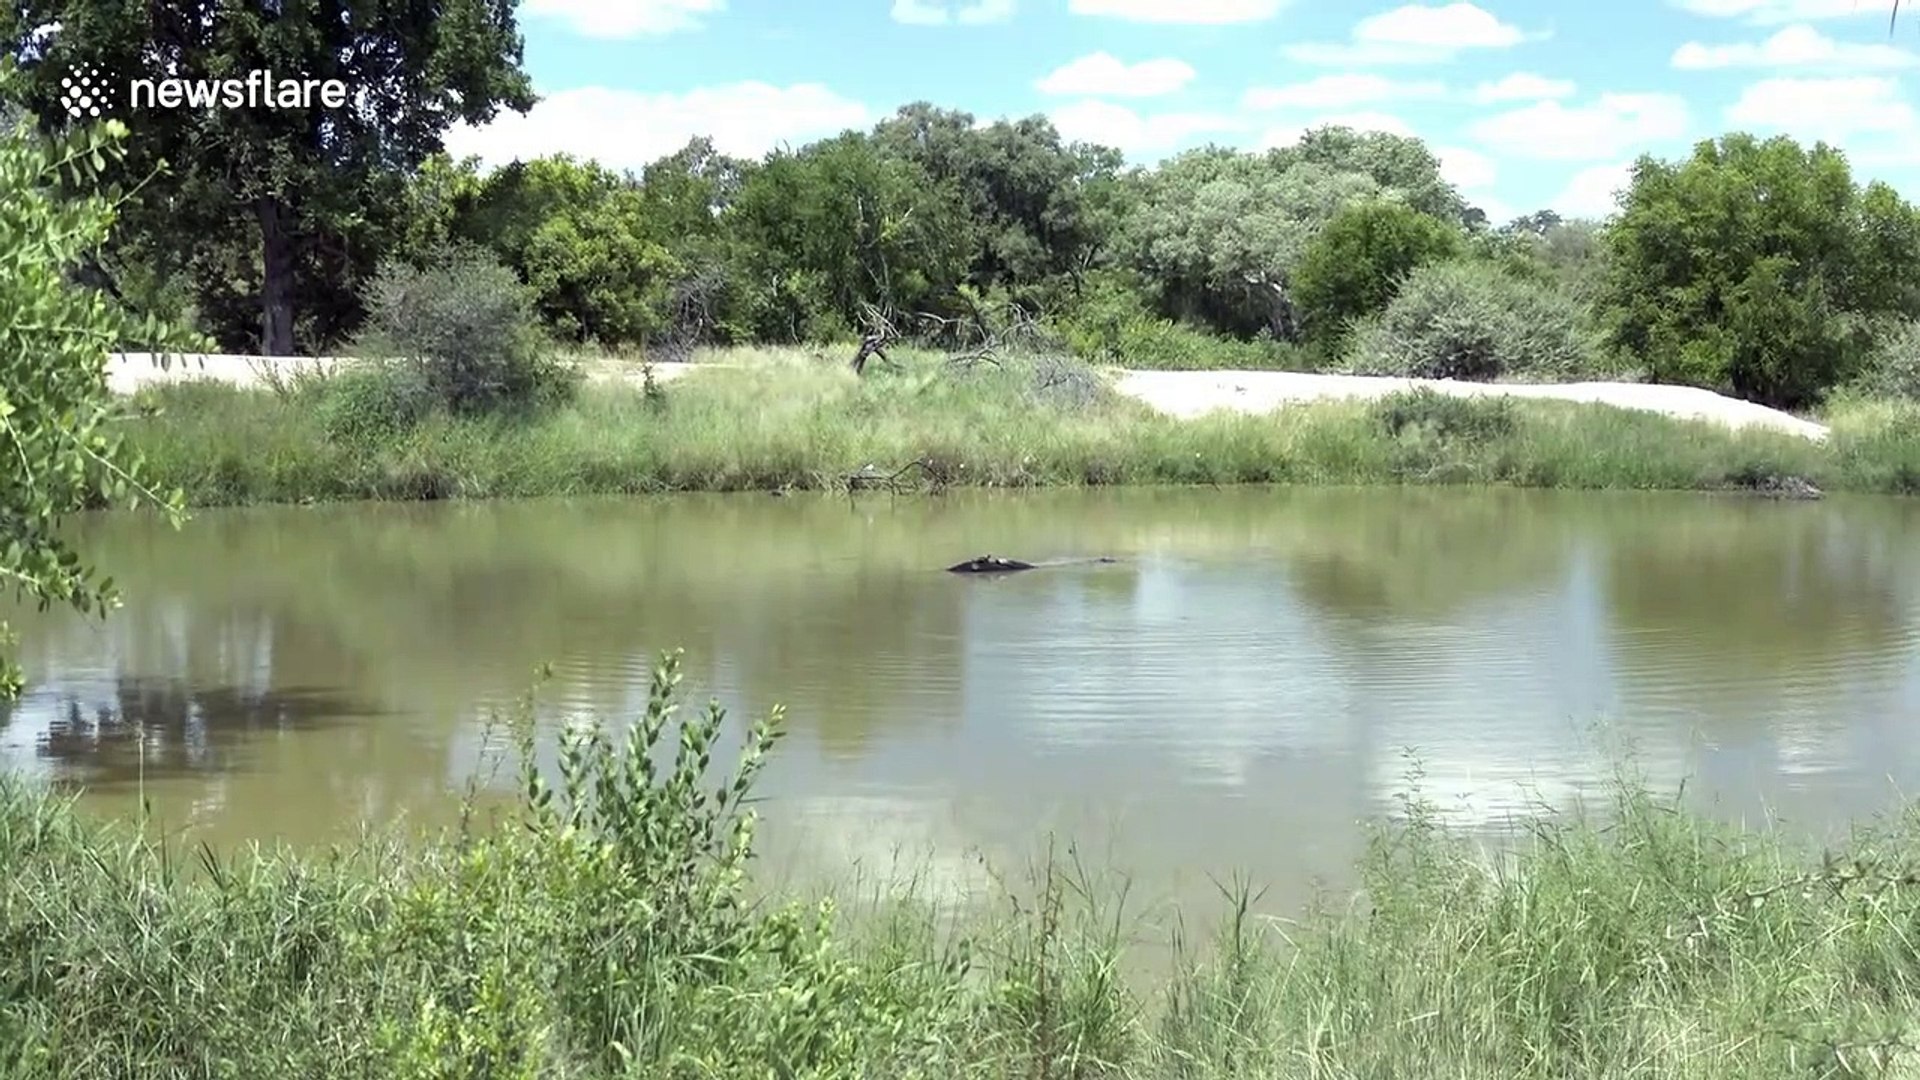 Hippopotamus washes turtles off its back before performing territorial poo flicking